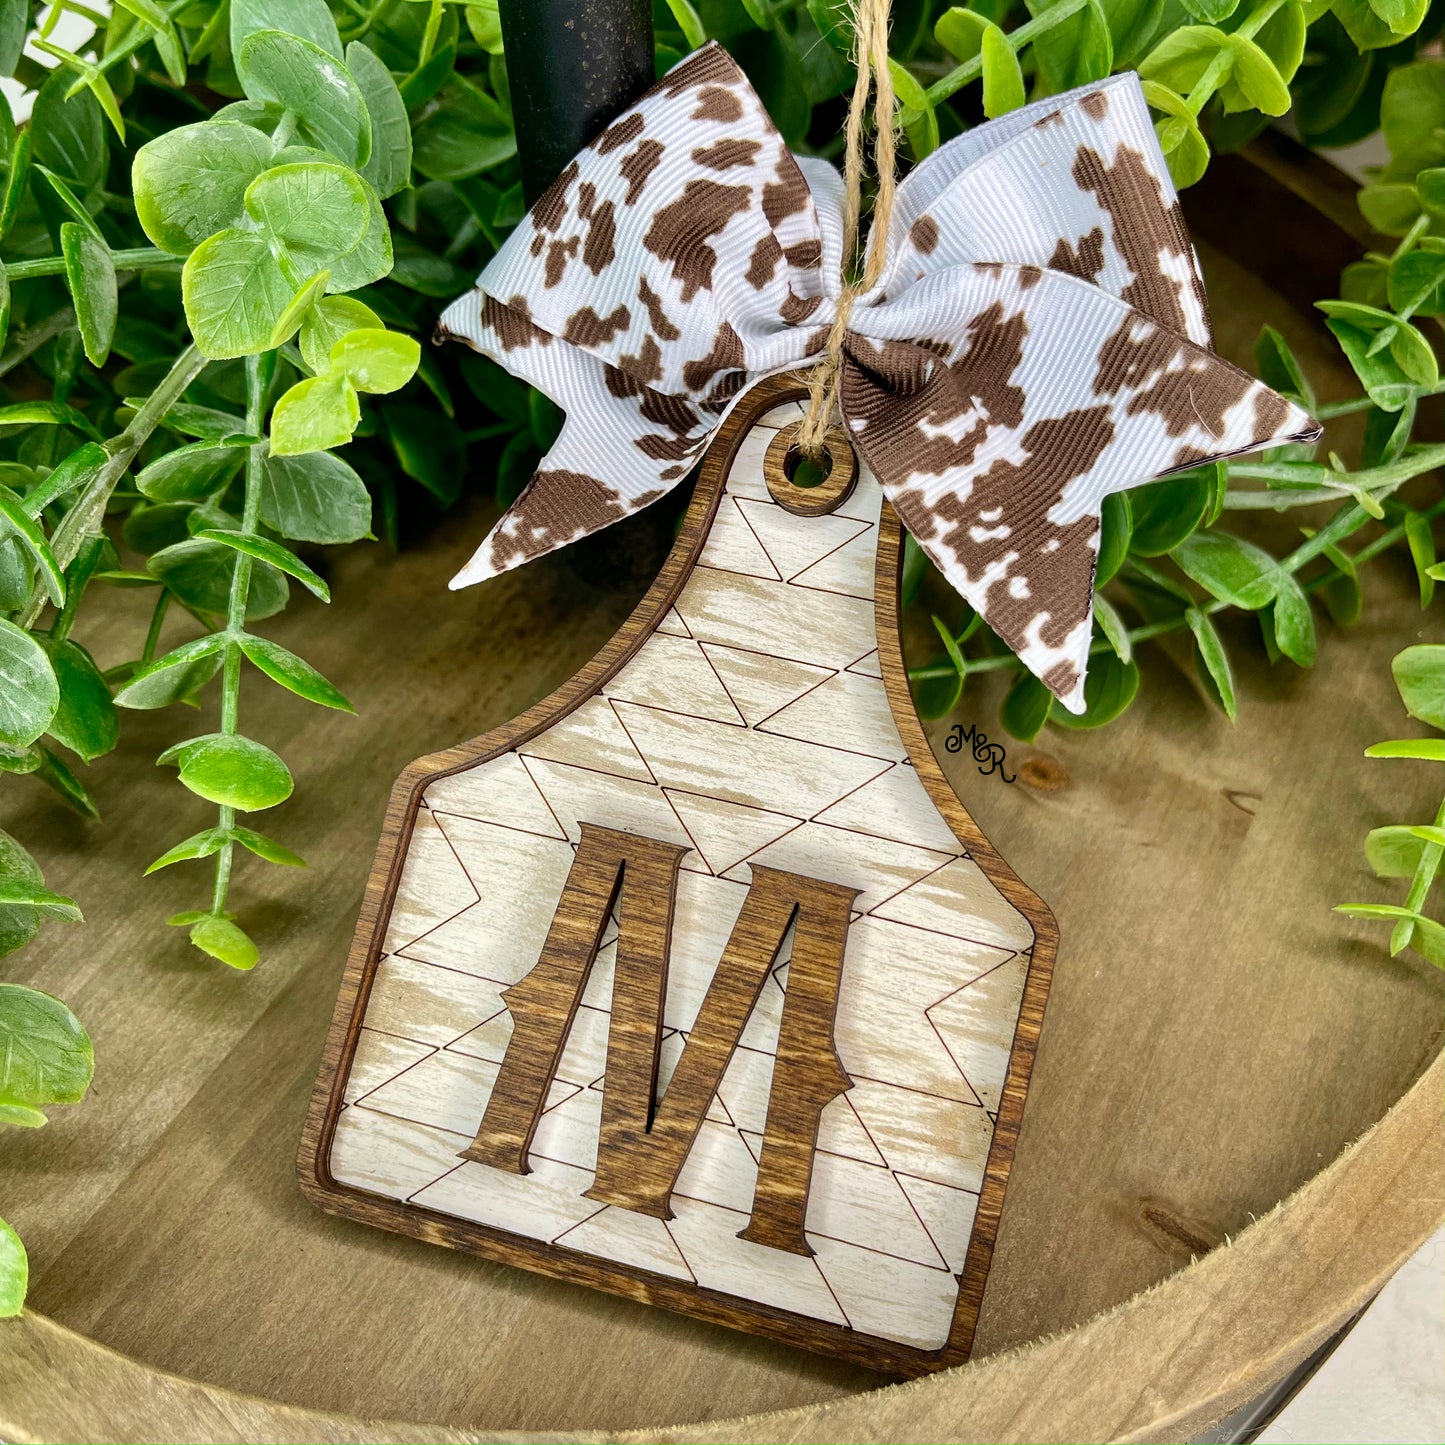 Weathered Wood Gift Basket Tags